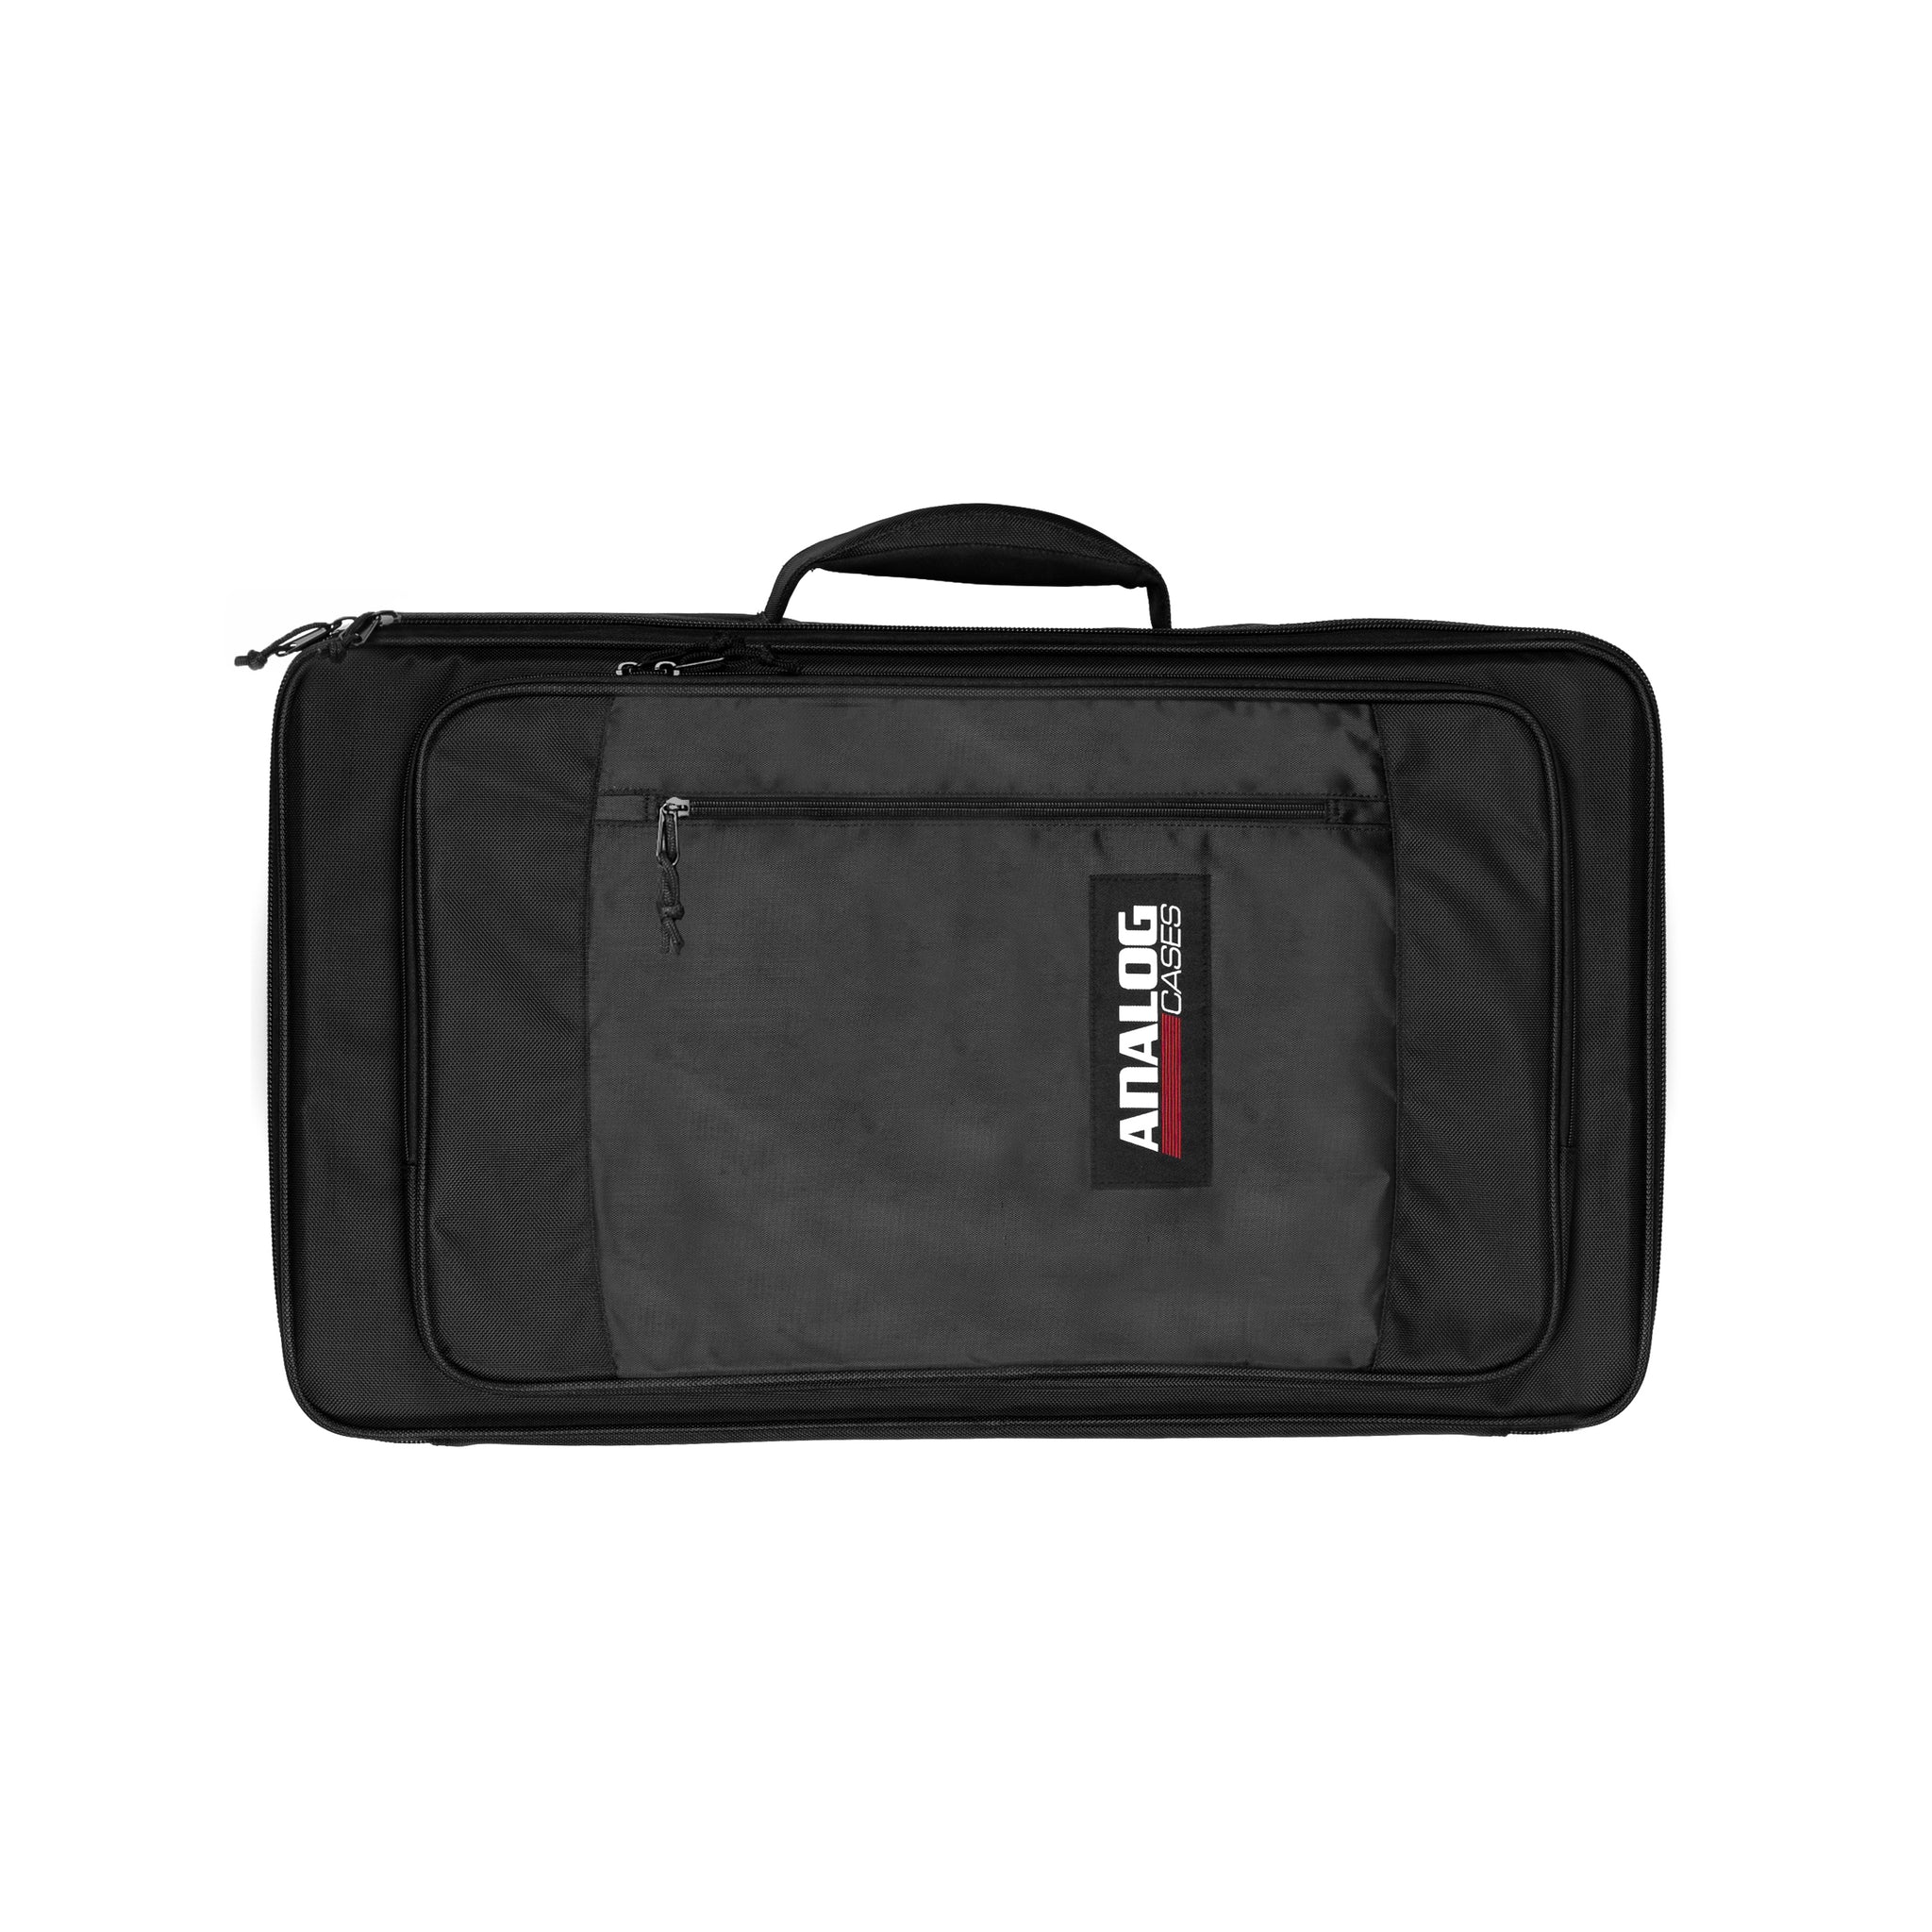 SUSTAIN Case For The Sequential Pro 3 or Behringer Odyssey